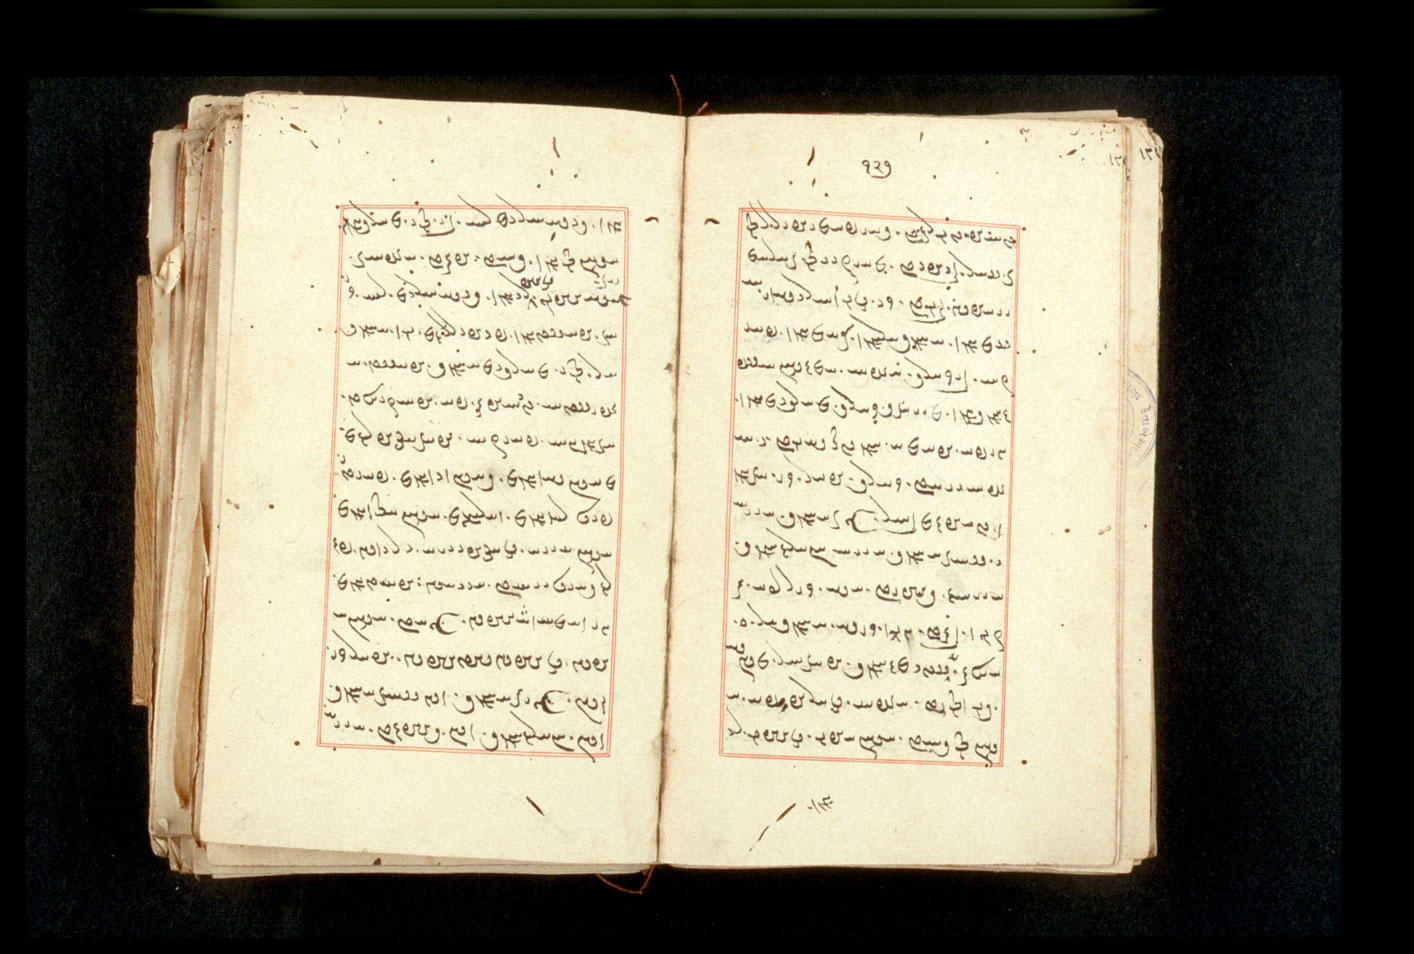 Folios 127v (right) and 128r (left)